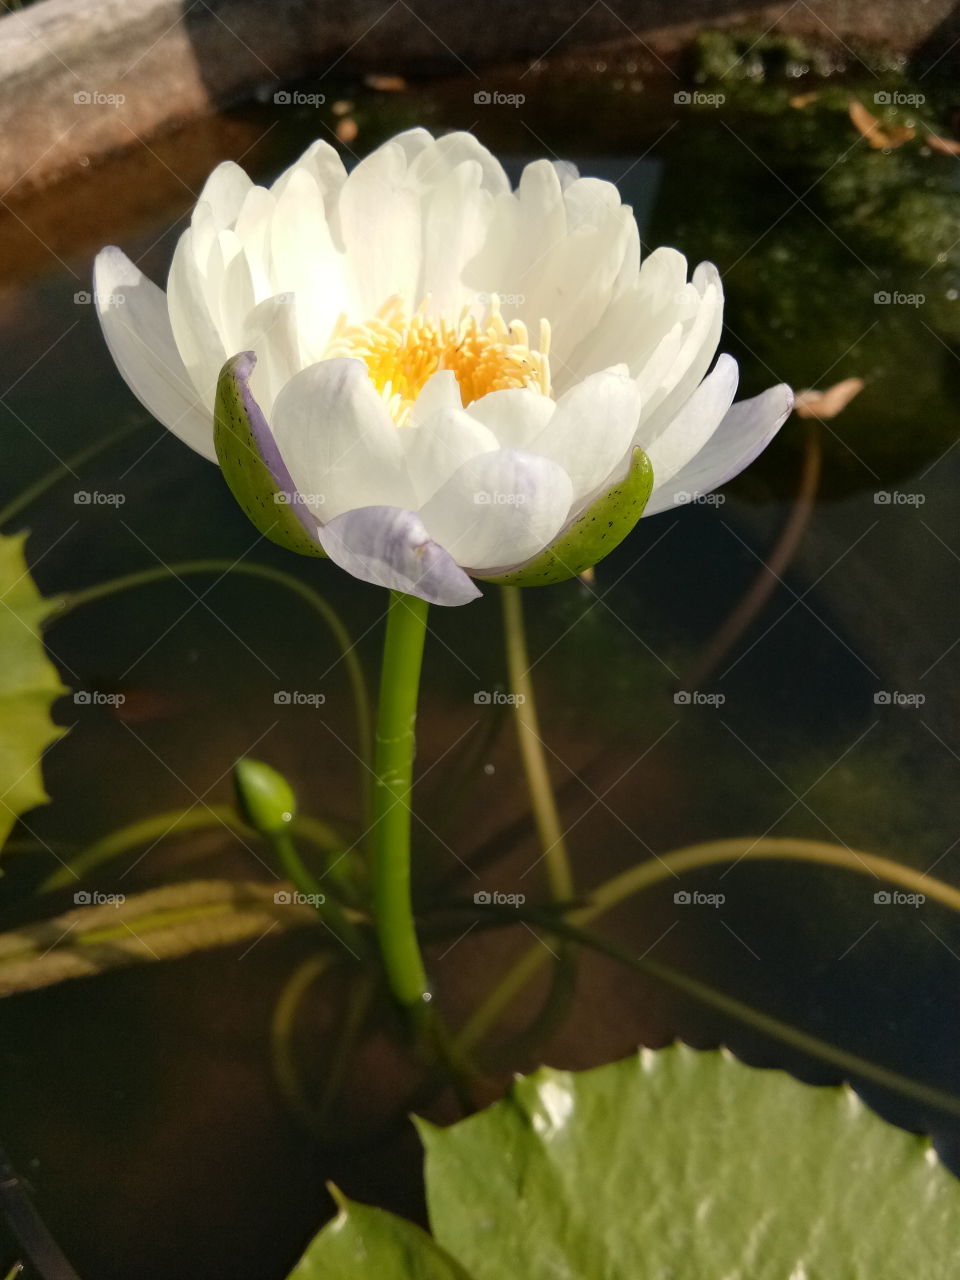 lotus
tree
beautiful 
flower
flora
lily
green
nature
thailand